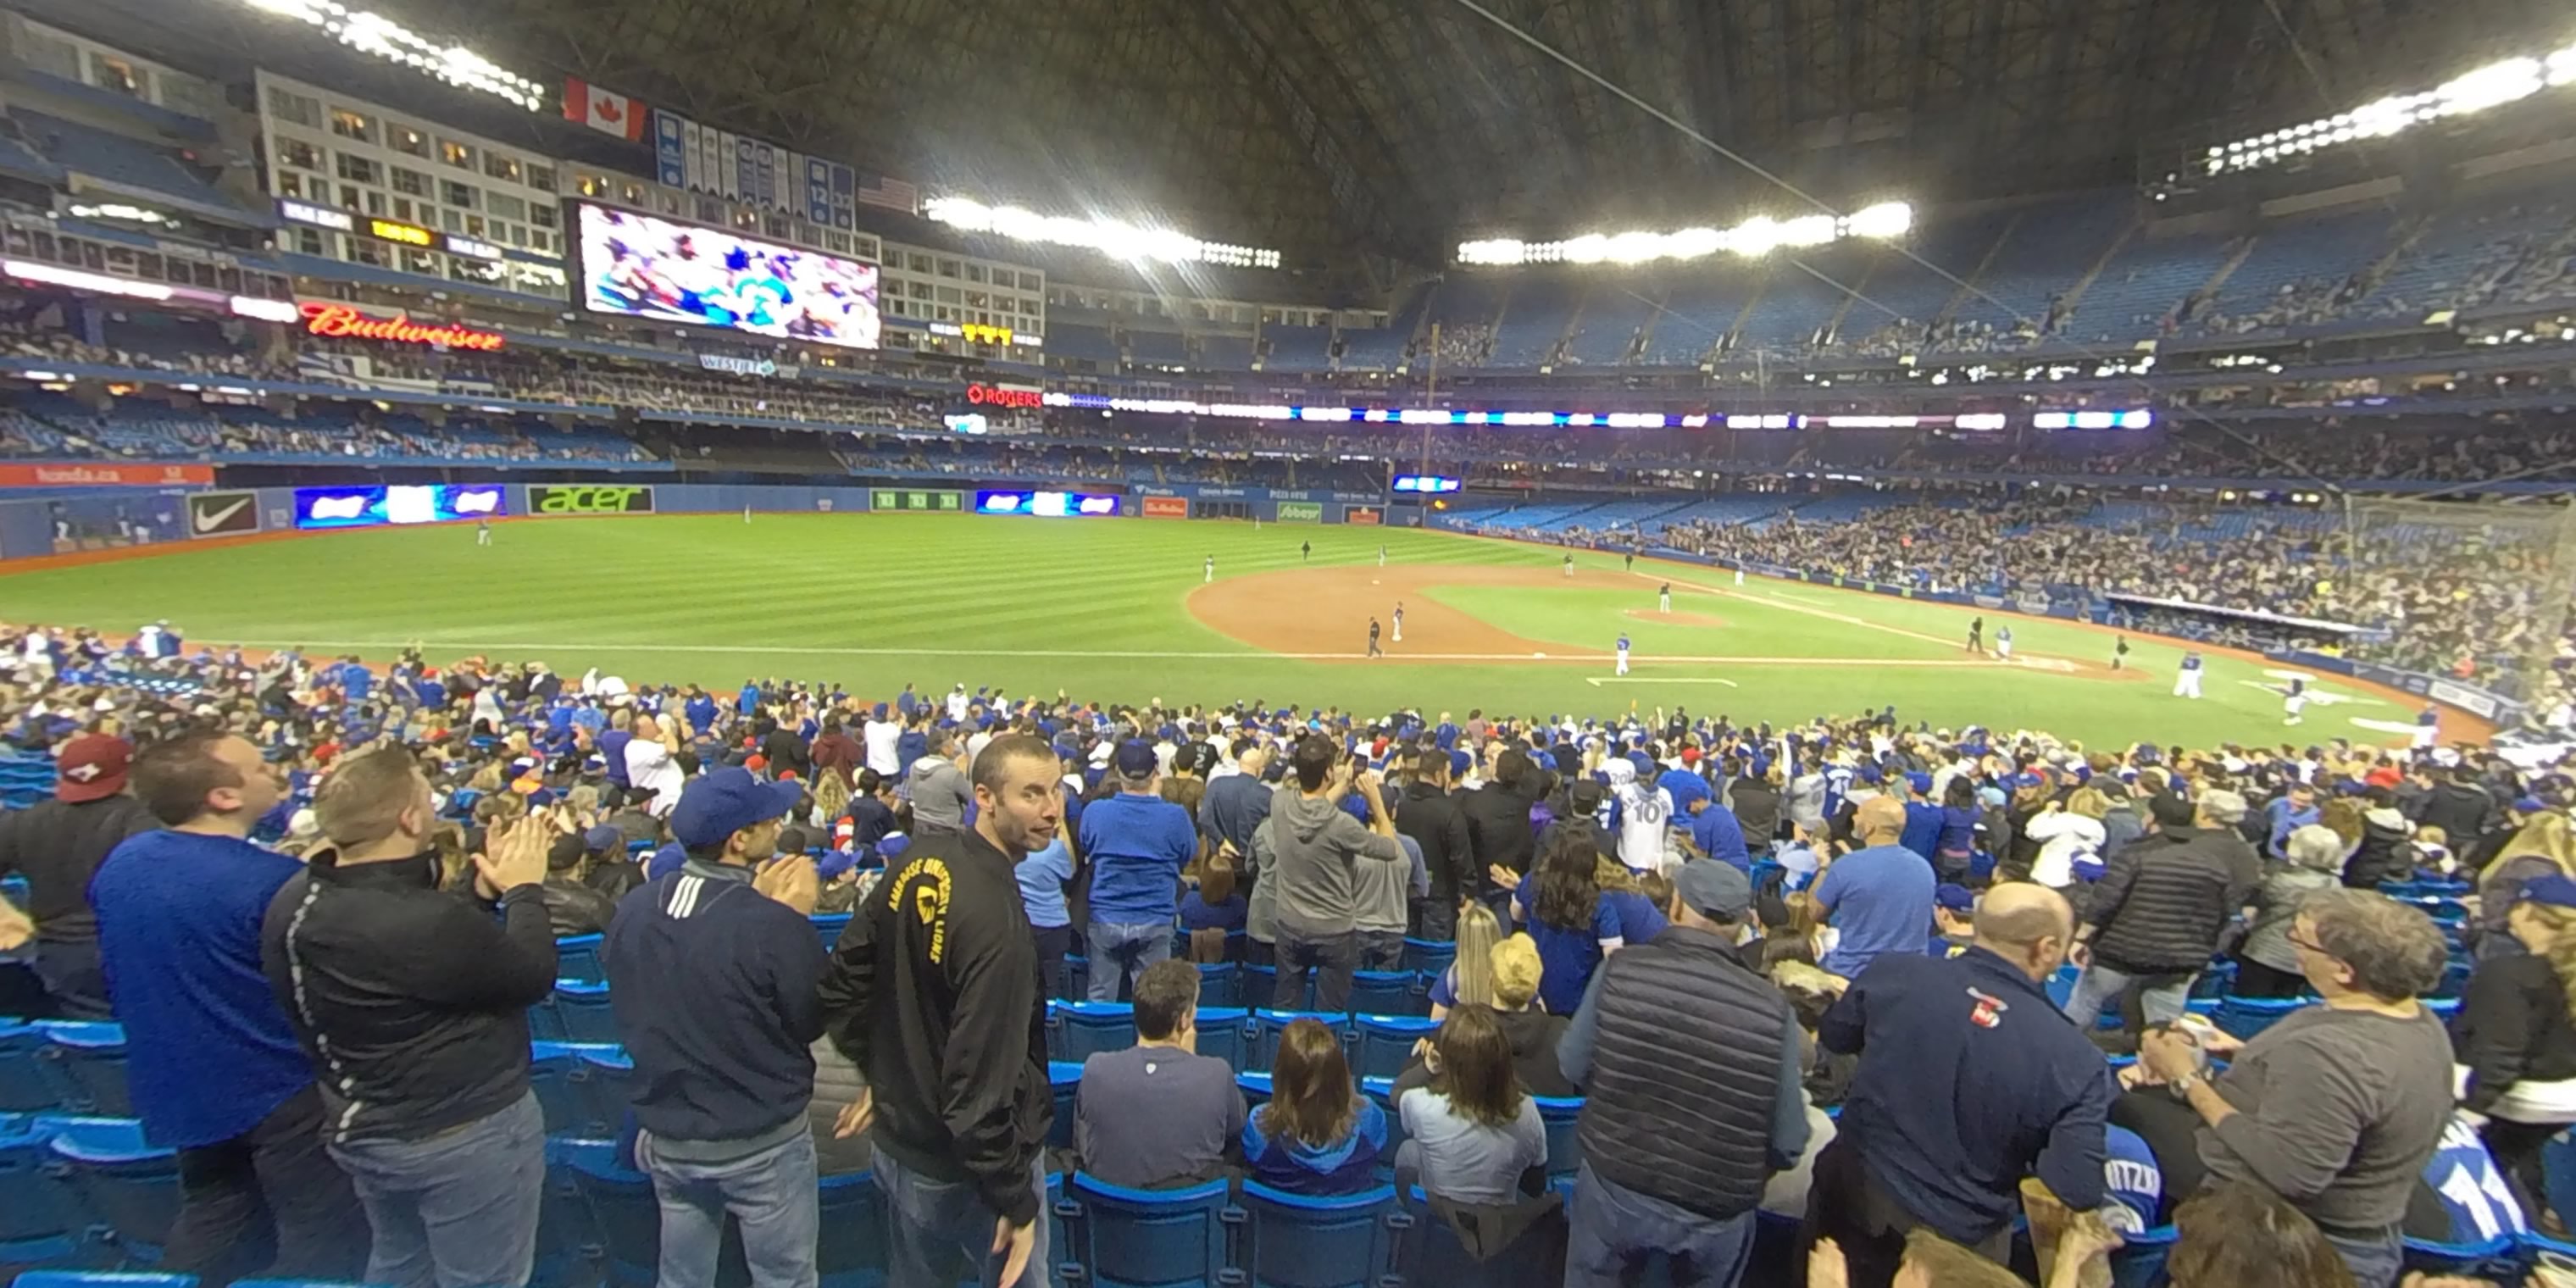 Gate 12 at the Rogers Centre -- Toronto, Ontario, CA, Sept…